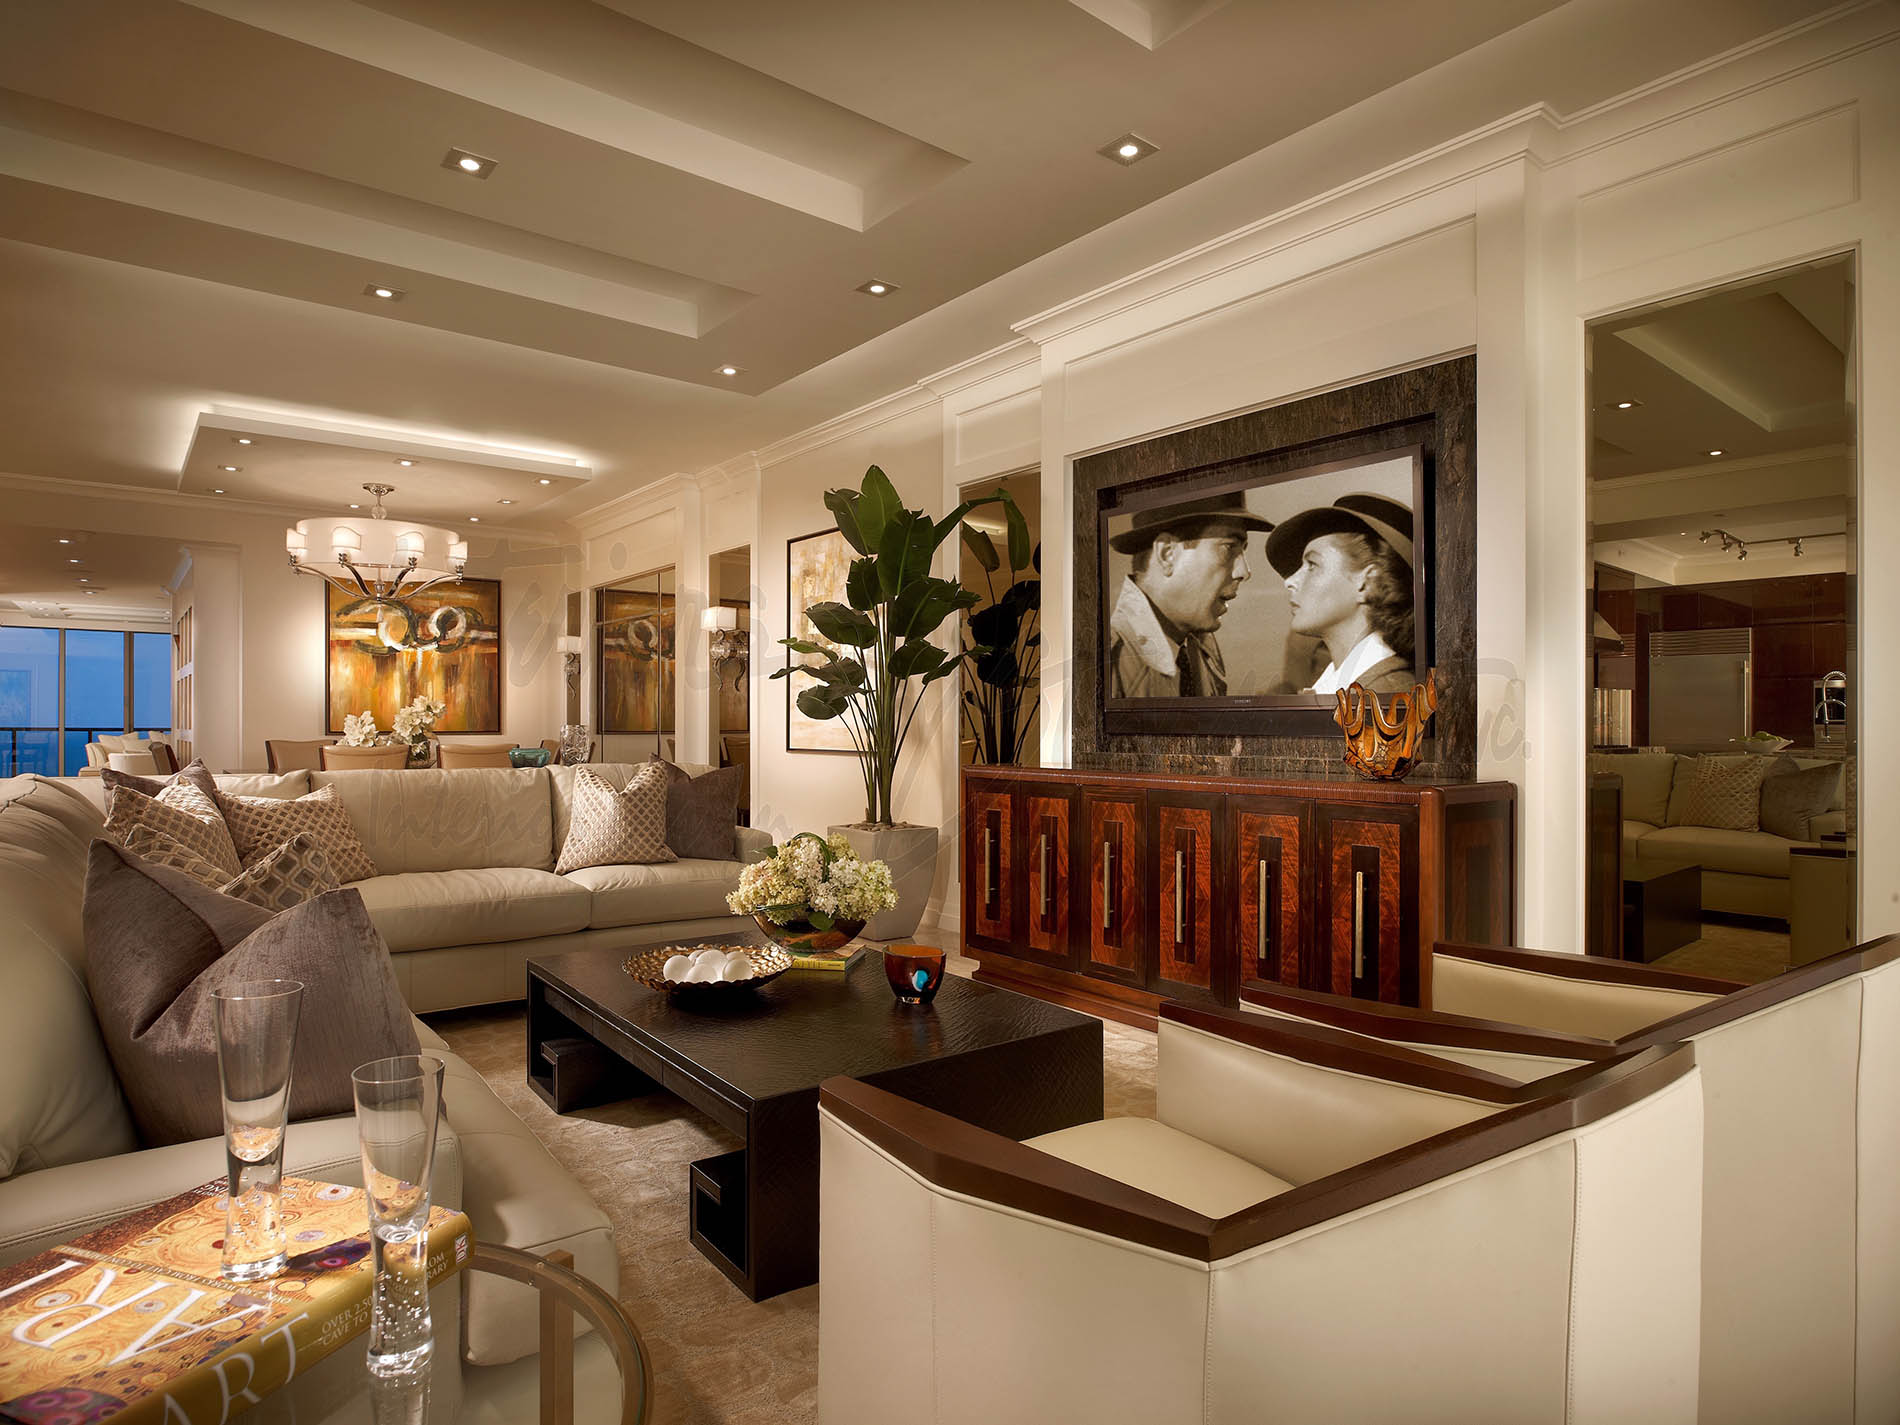 The Characteristics of Traditional Interior Design Style